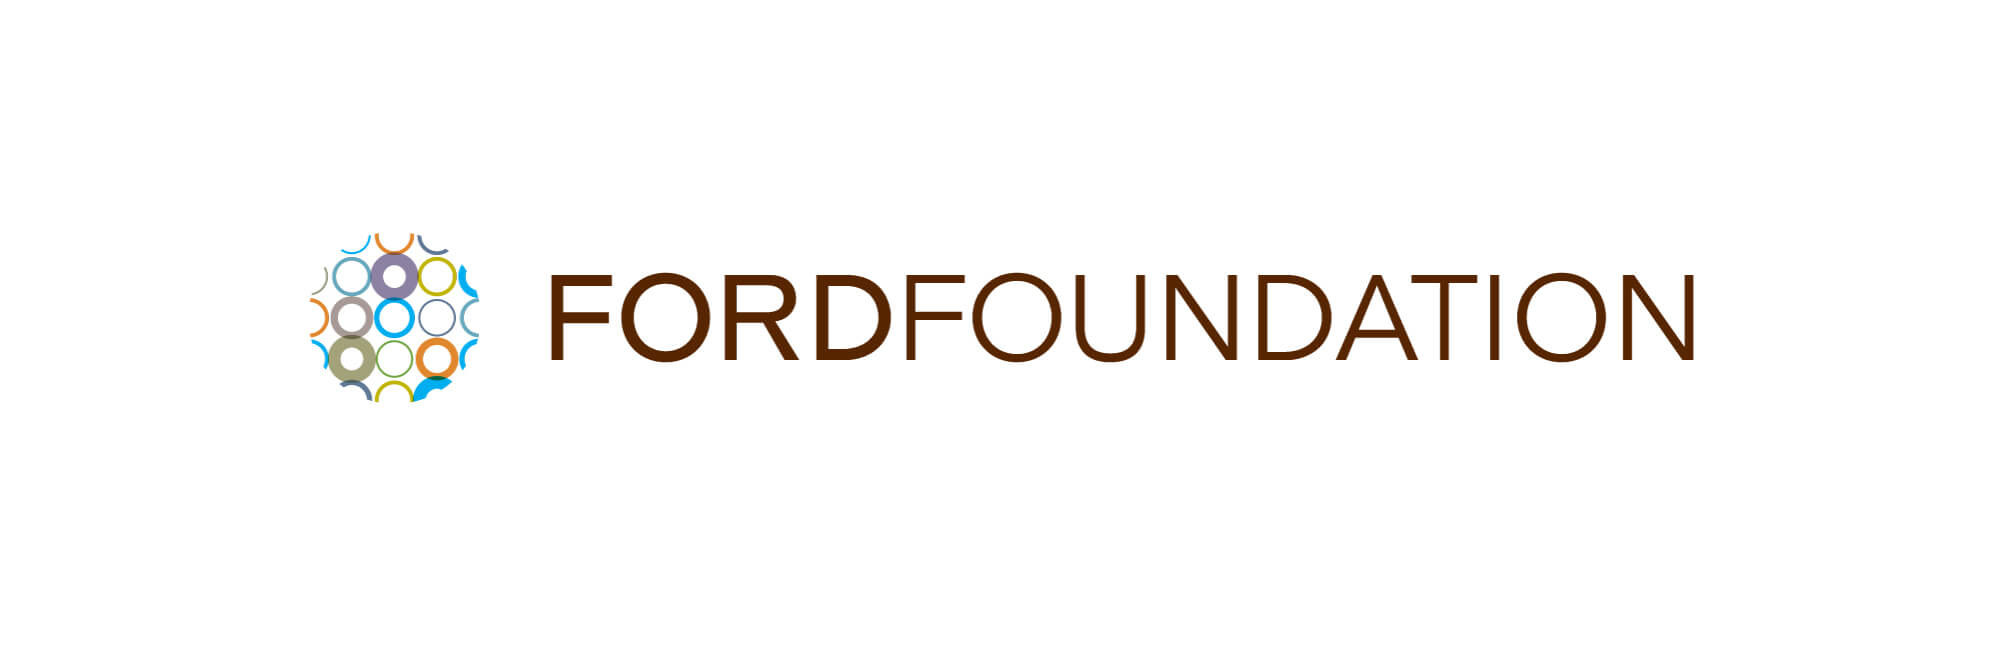 Ford foundation funding #9